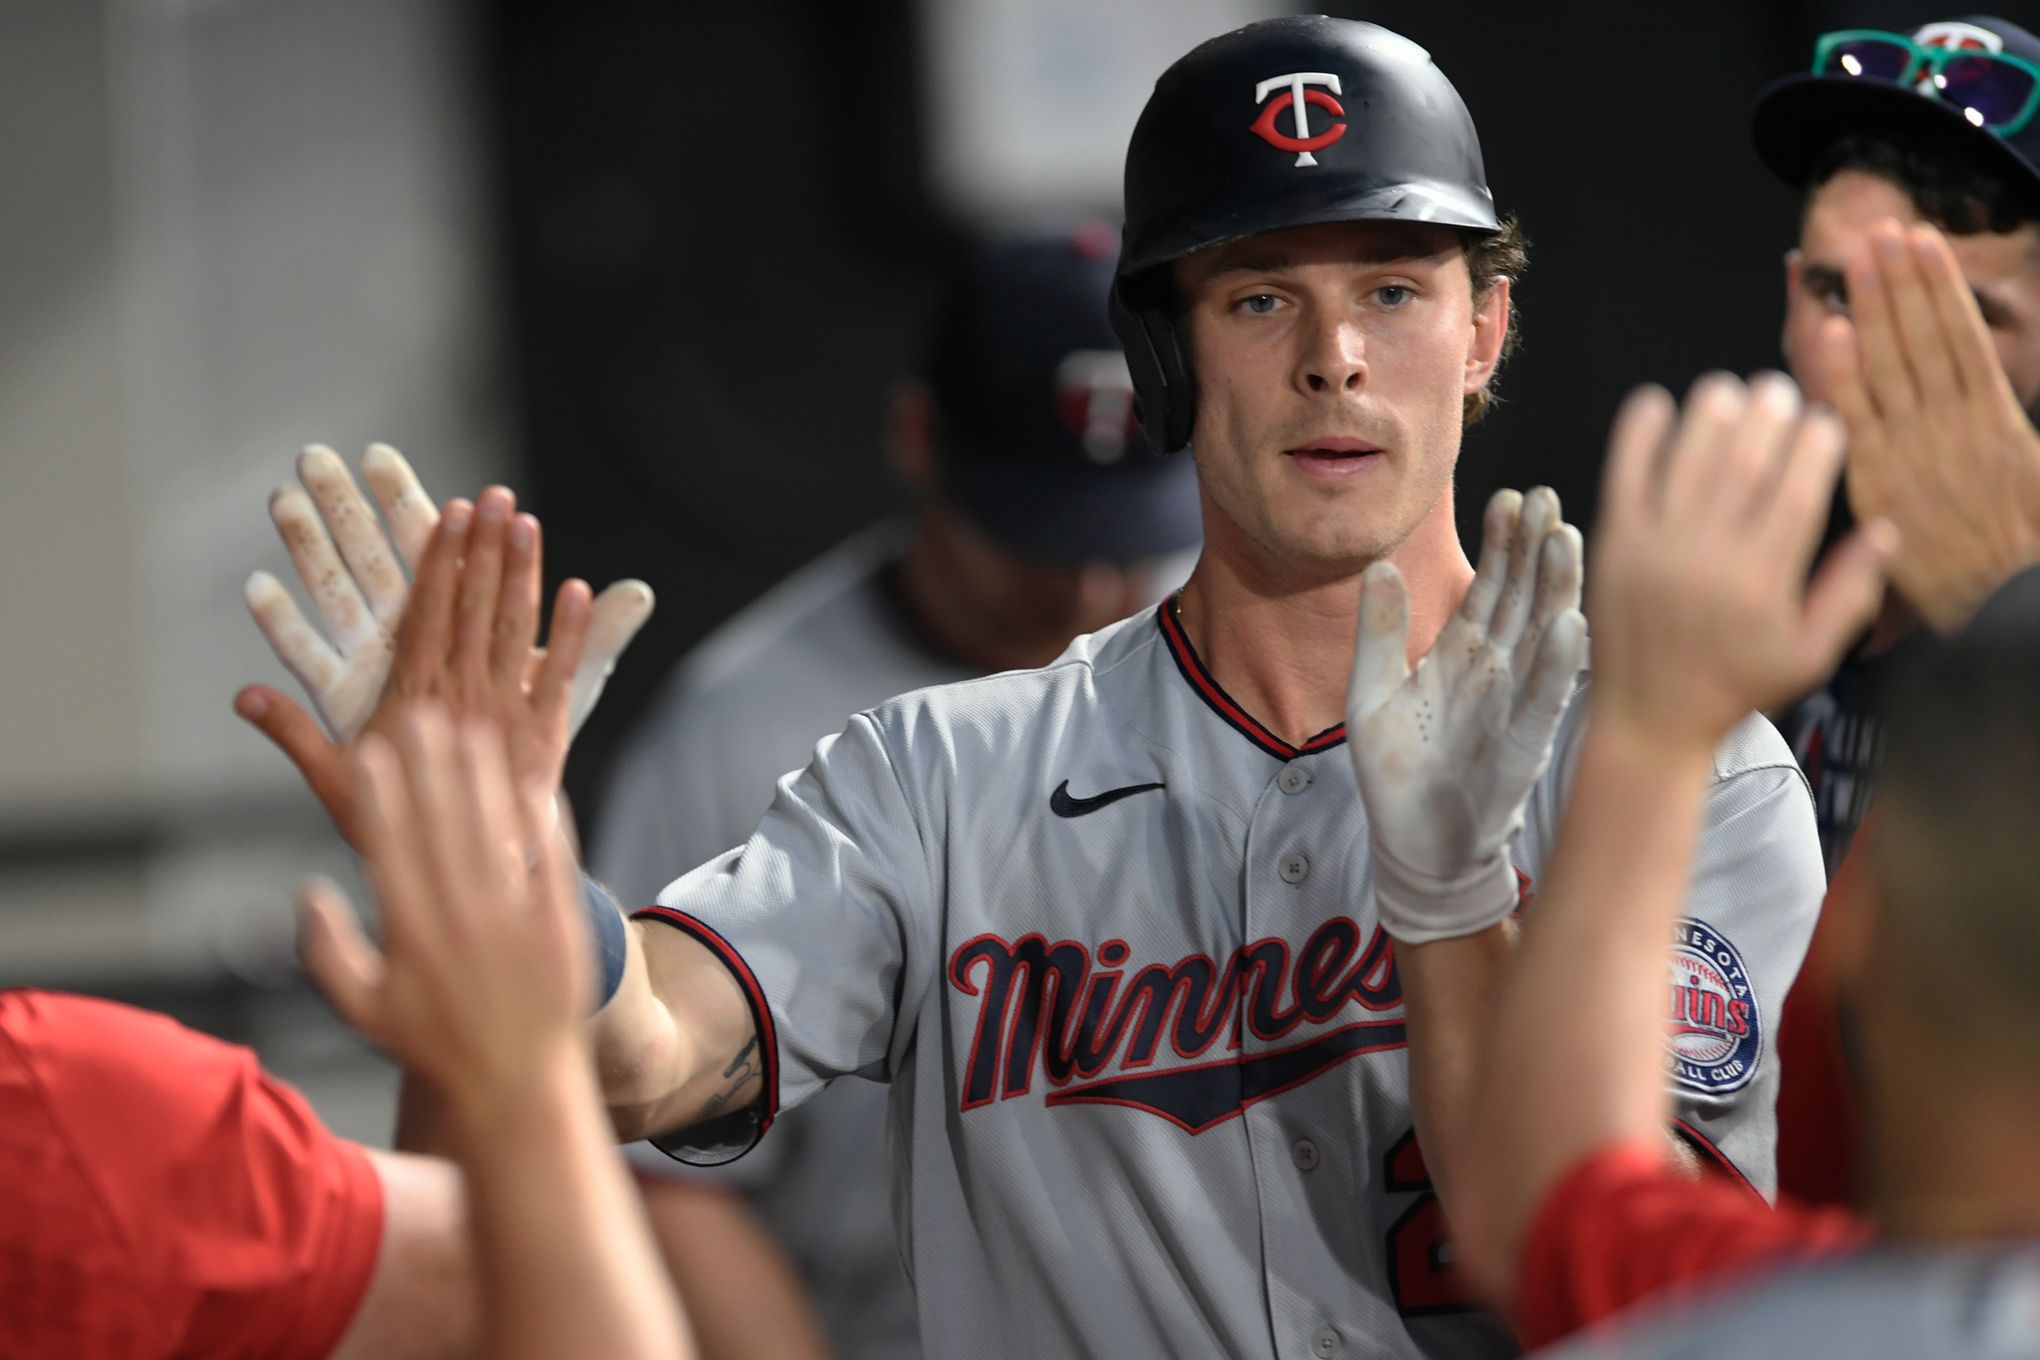 Max Kepler, Jorge Polanco remain joined at the hip as Twins teammates